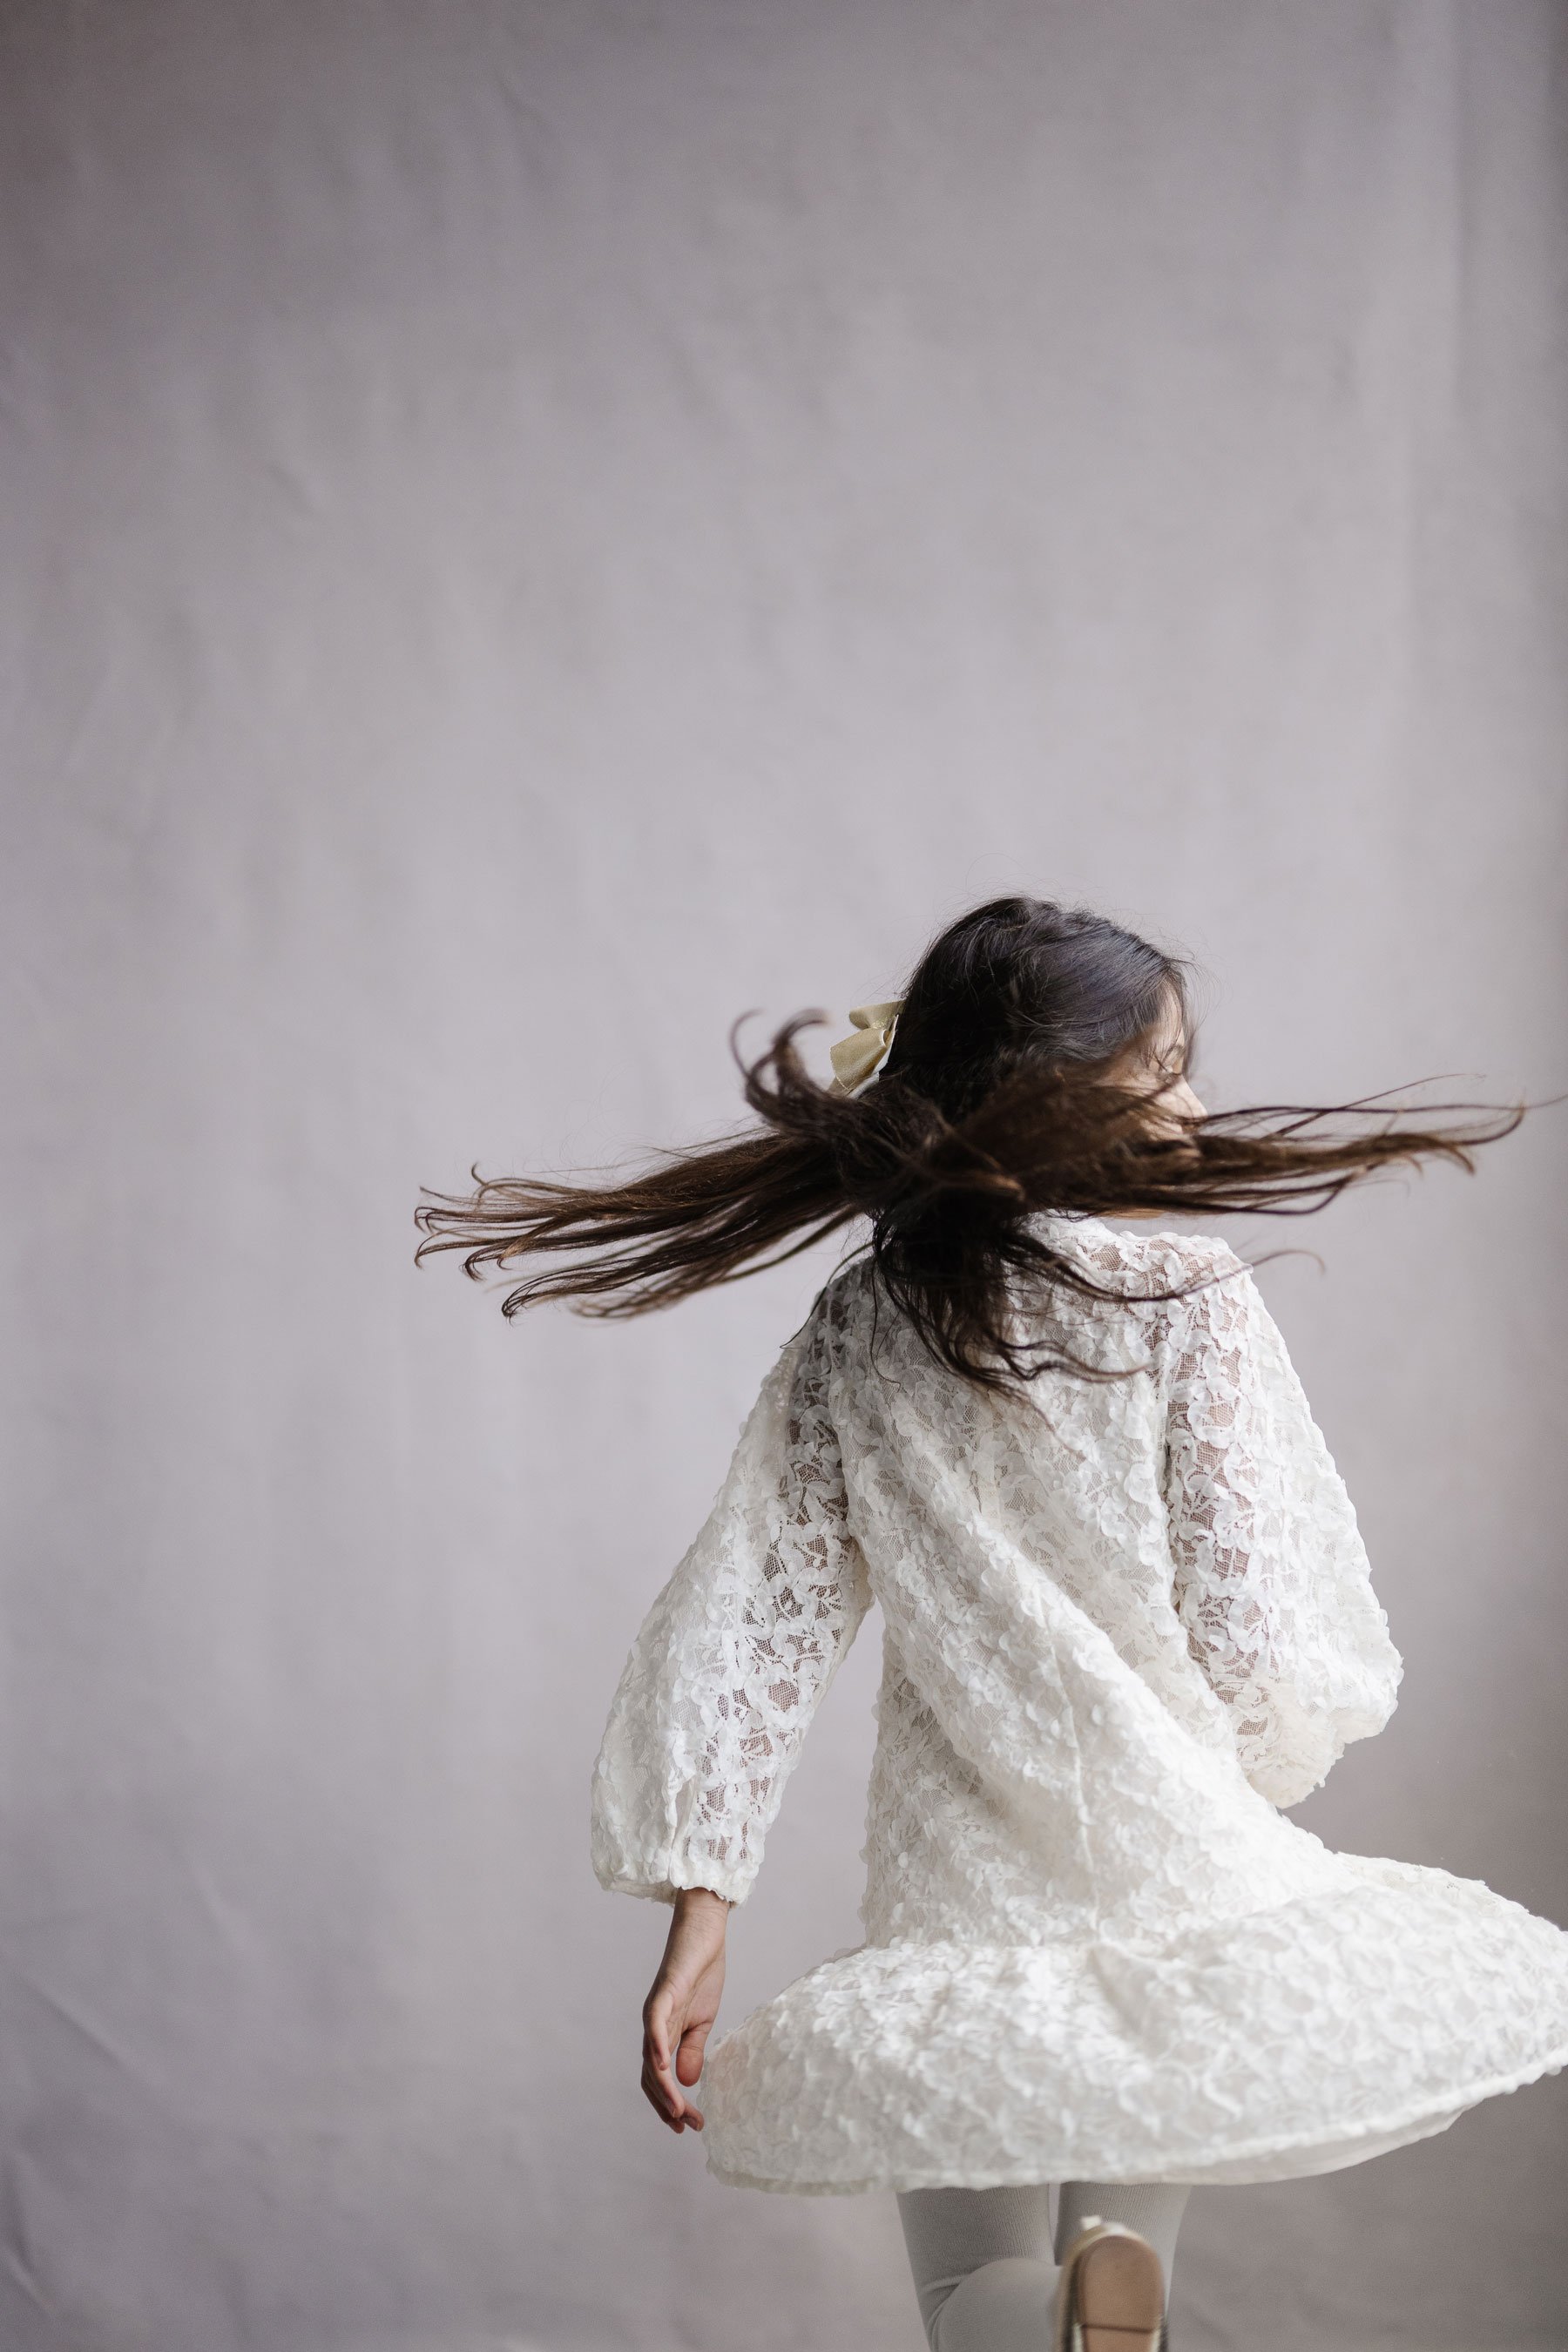  Pictures are a key part of cherishing childhood memories, like how your daughter is twirling nonstop in her magical childhood era. Carefree childhood capture memories fine art everyday #lifestylefamilyphotographer #heidileonardphotography #capturech